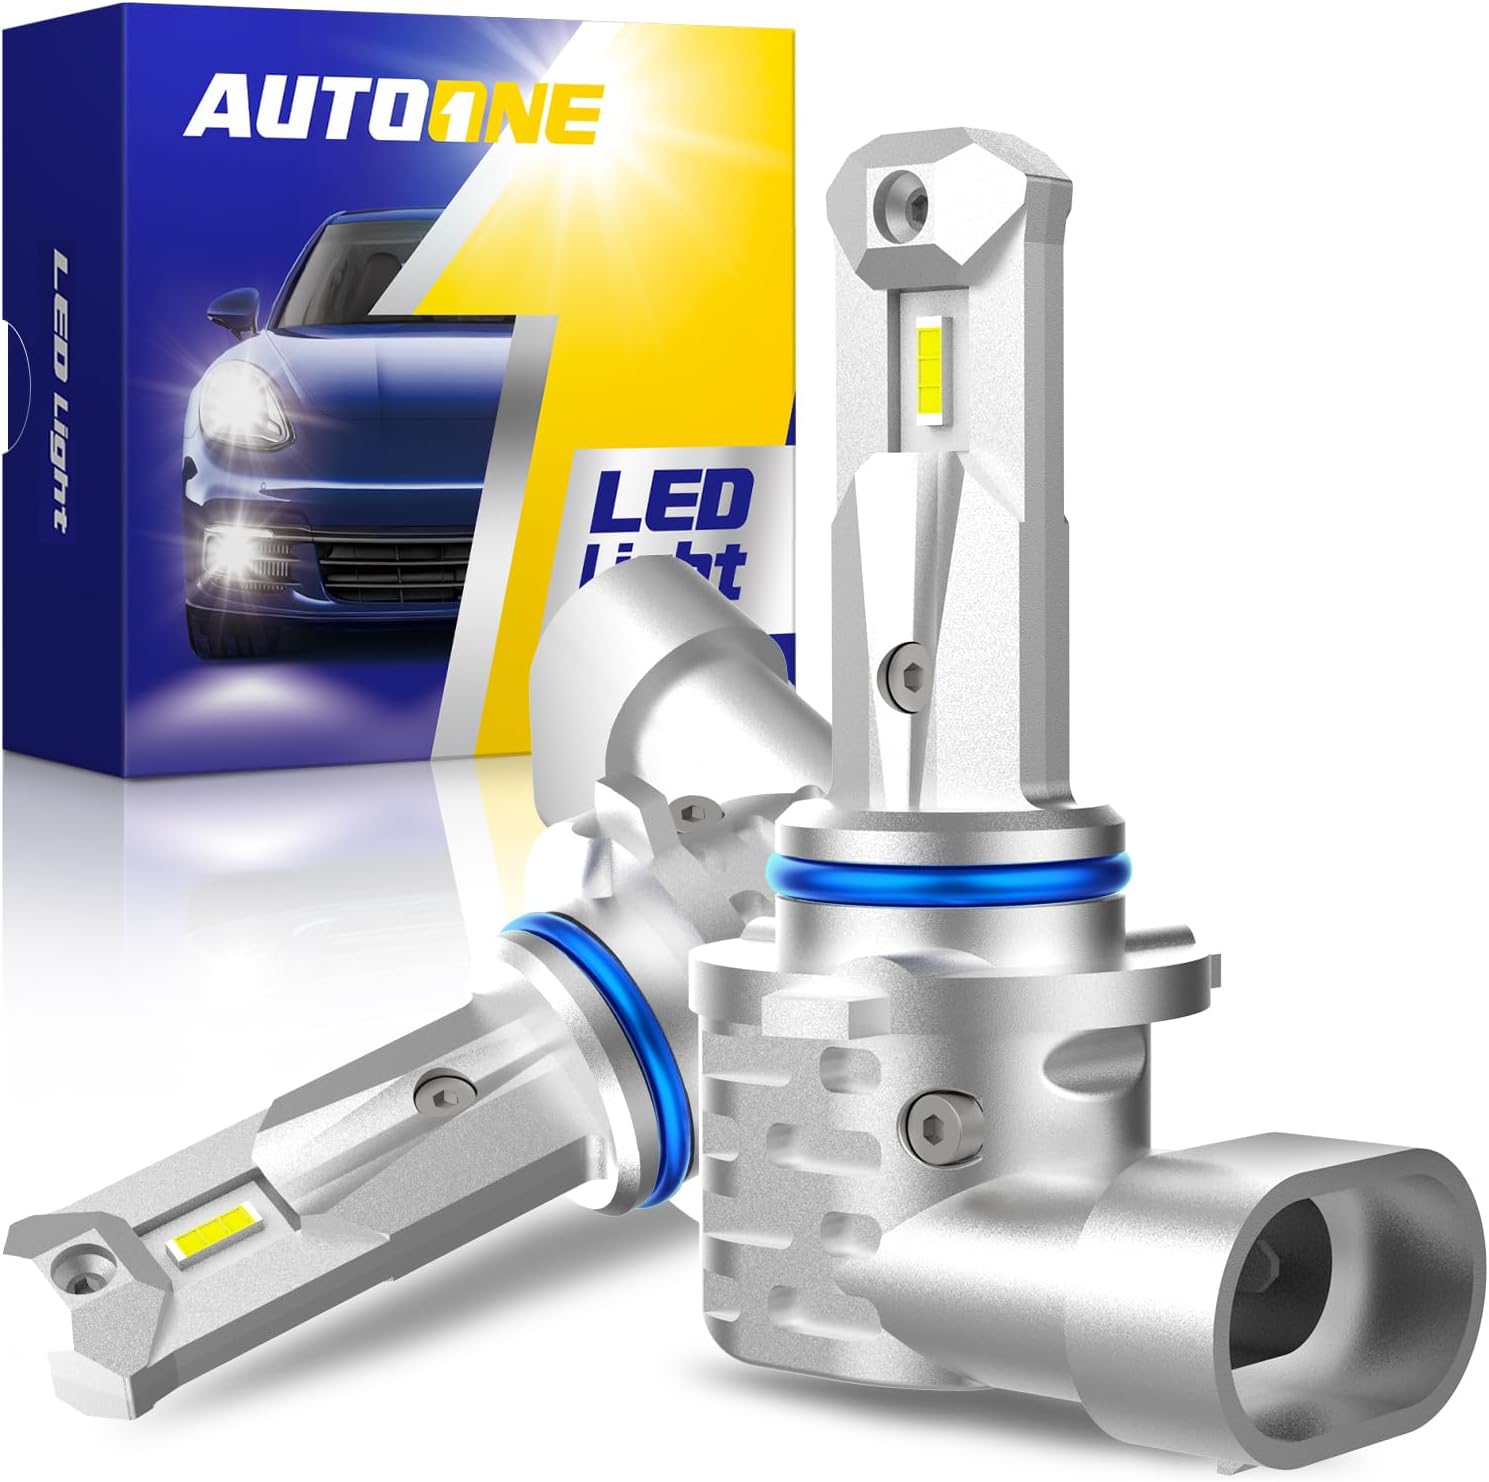 AUTOONE 9006 LED Headlight Bulbs - HB4 Low Beam Headlamp Conversion - Fog Light  DRL Compatible - 6000K White, Plug-and-Play, Pack of 2